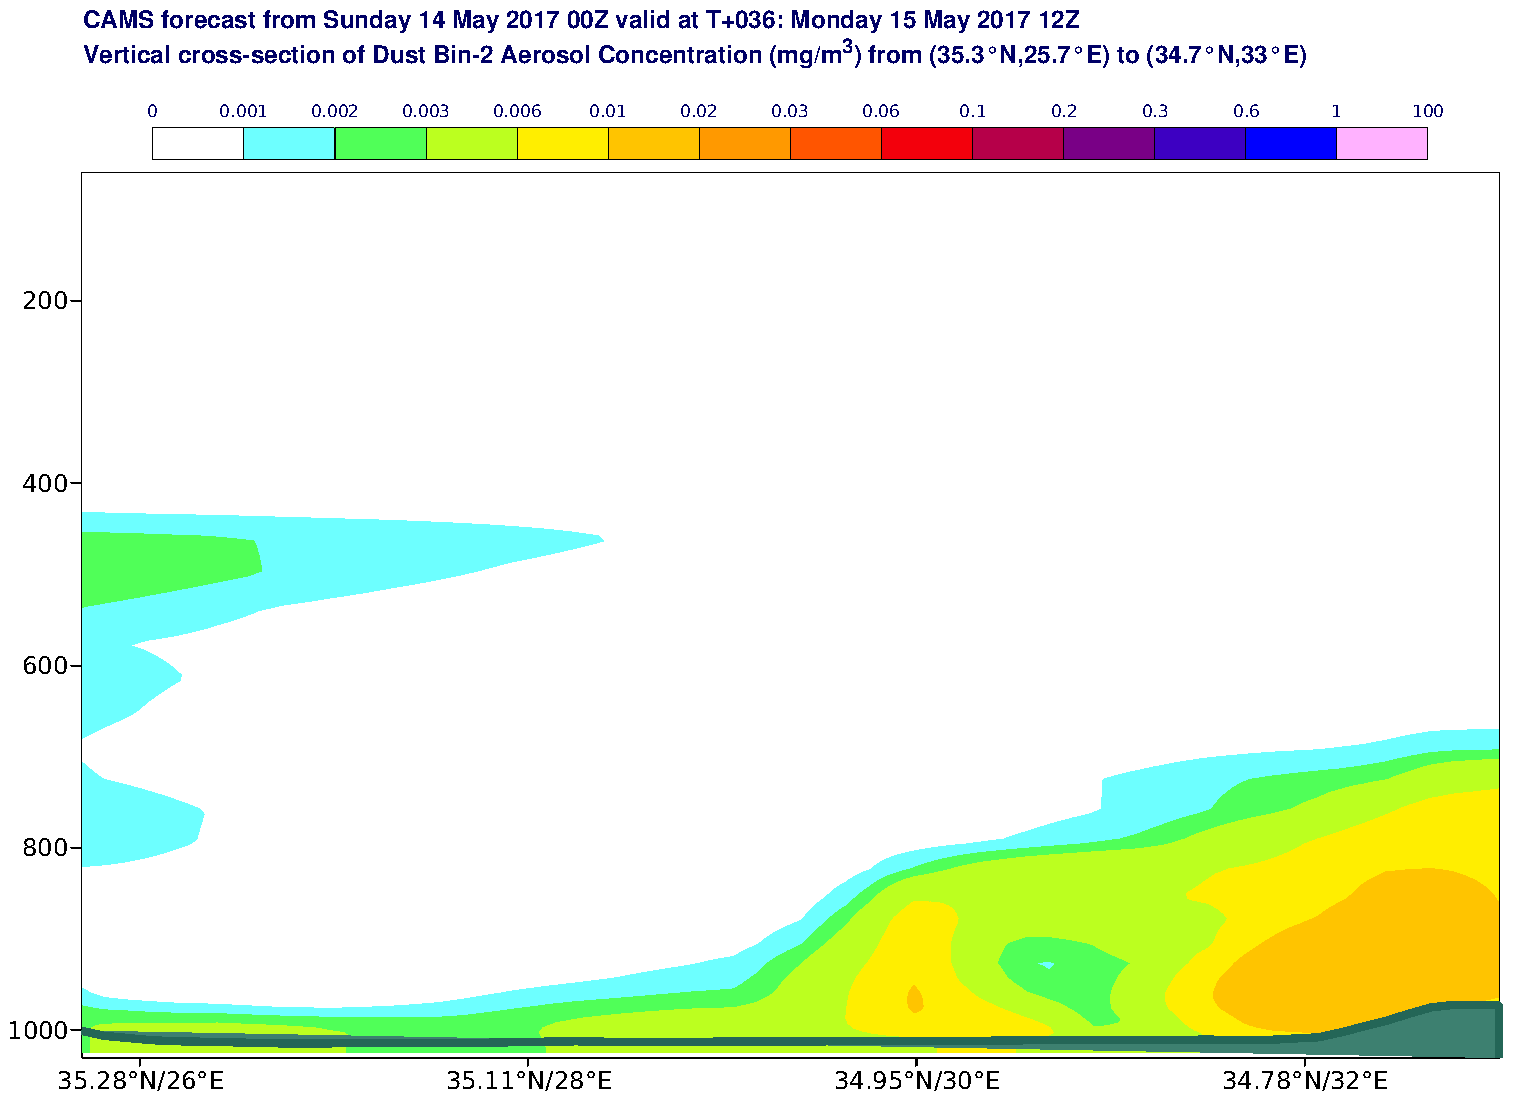 Vertical cross-section of Dust Bin-2 Aerosol Concentration (mg/m3) valid at T36 - 2017-05-15 12:00